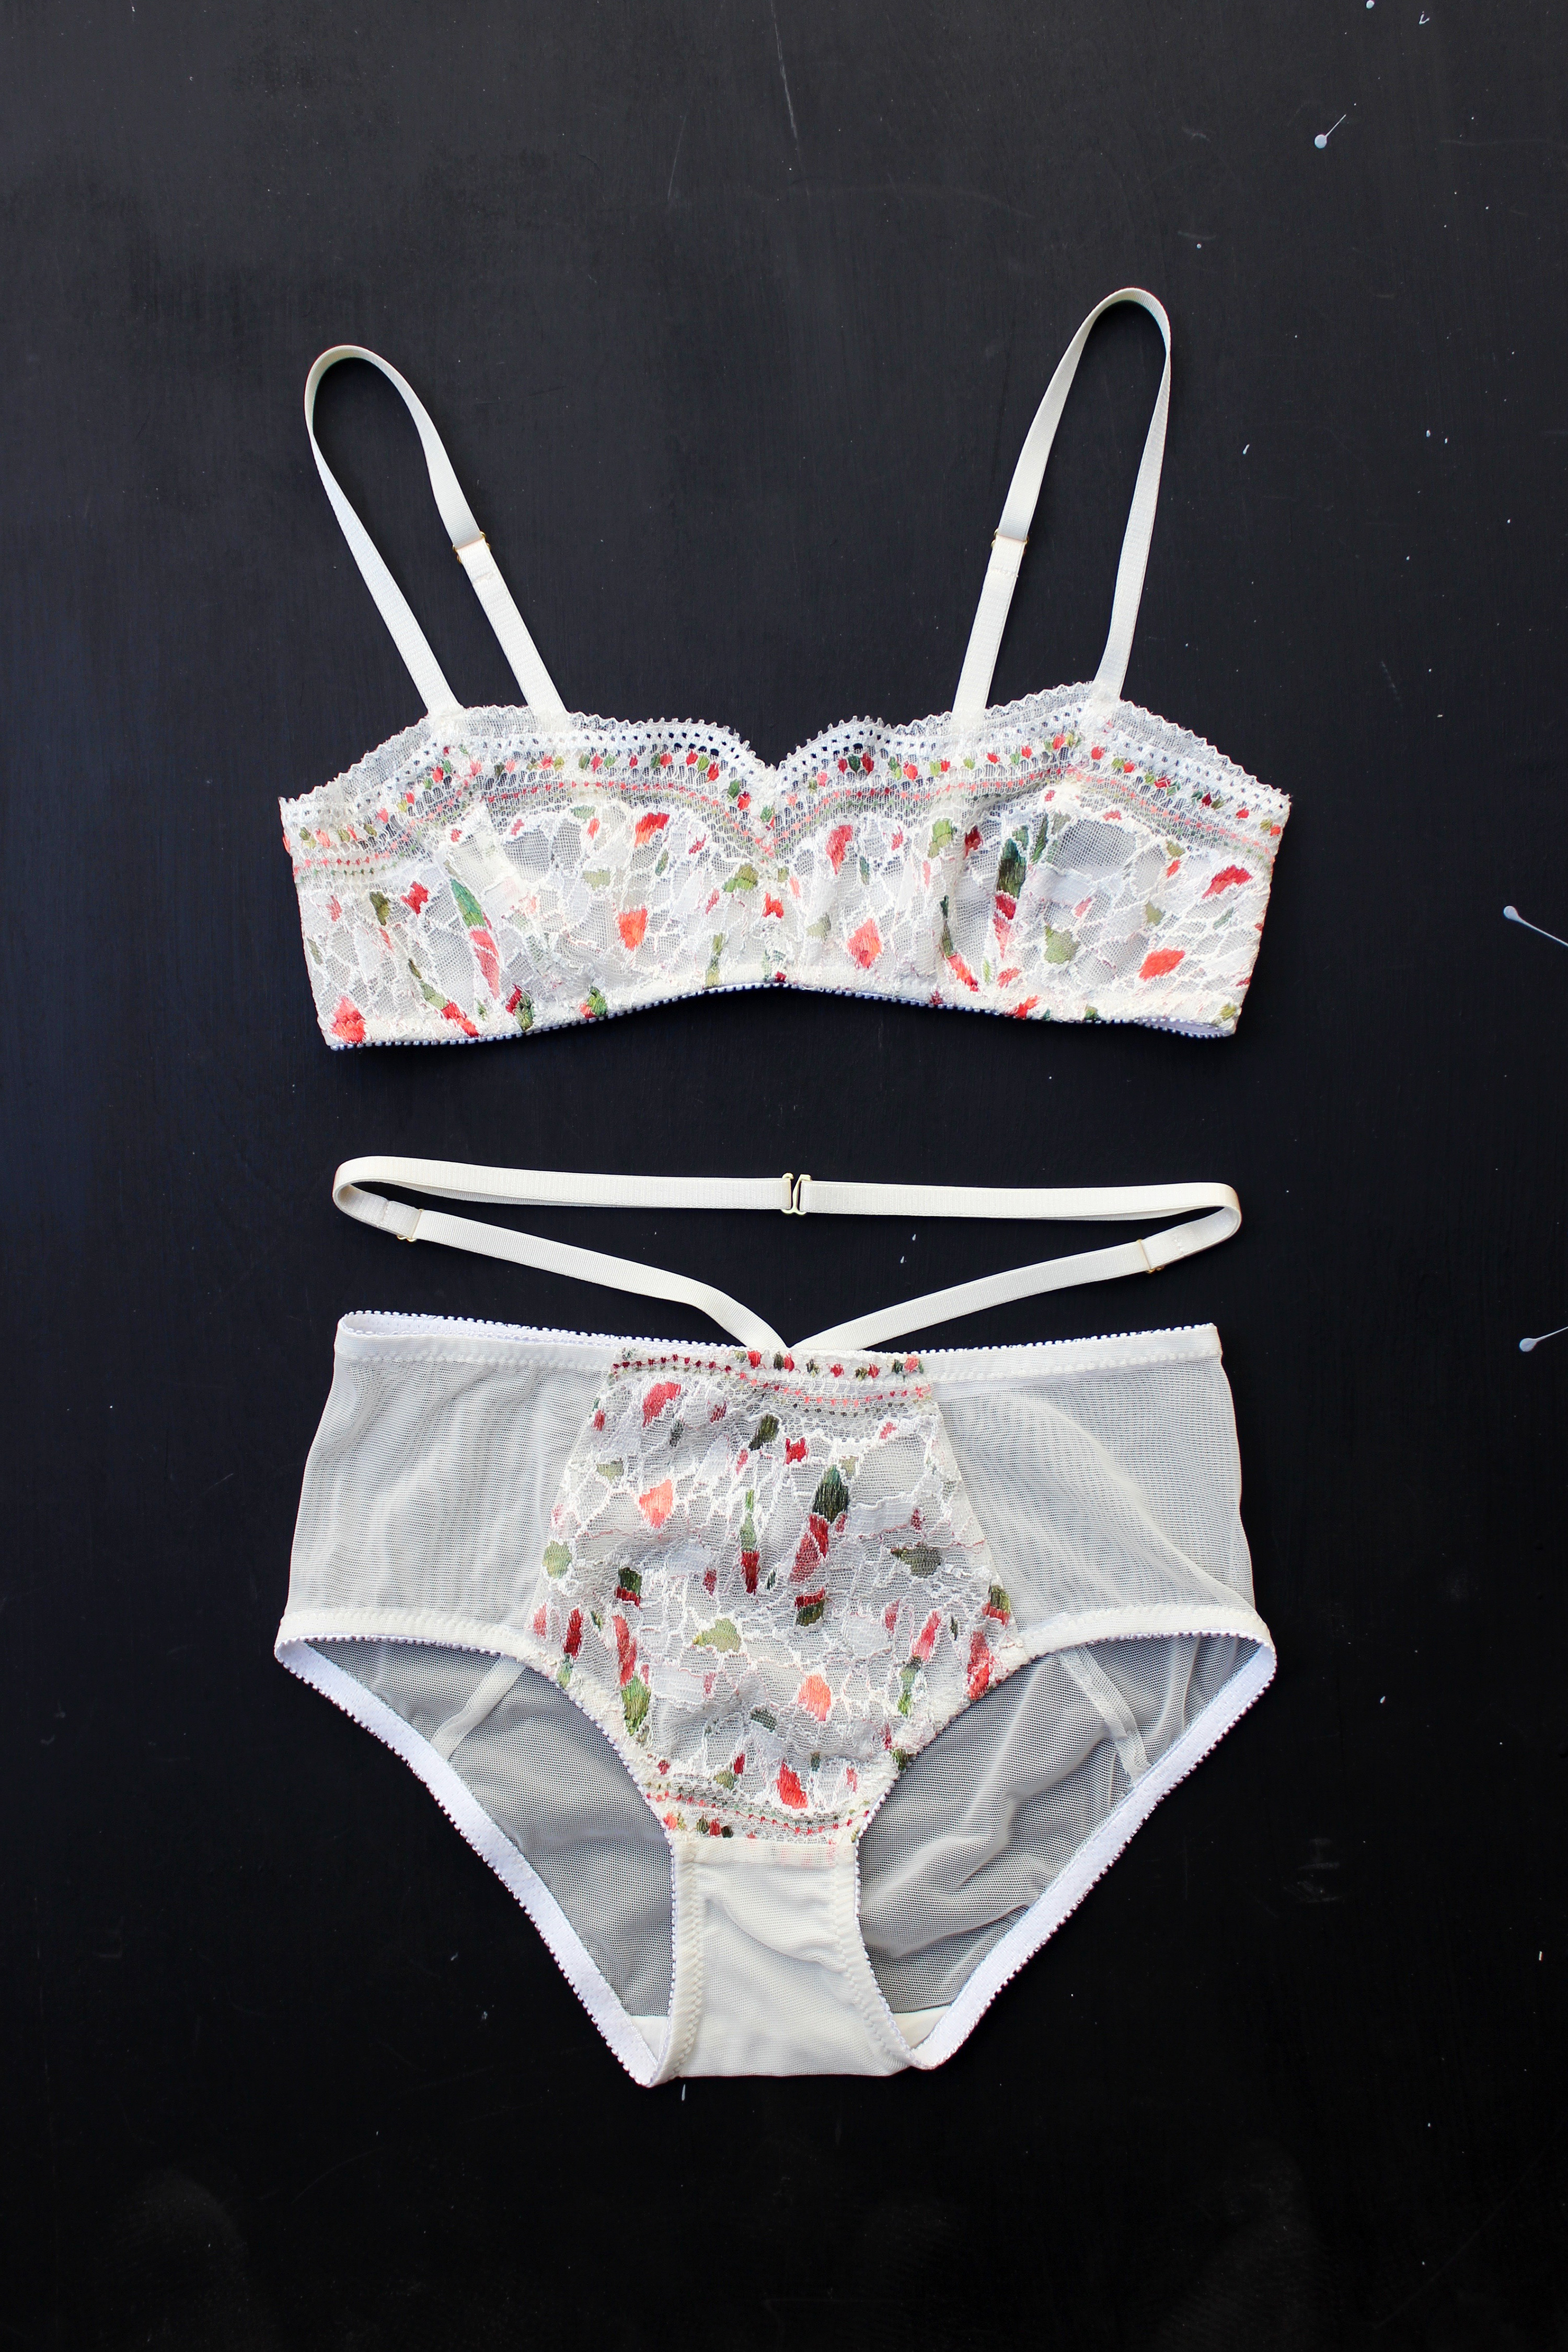 DIY Baclonette Bralette and Underwear Tailor Made Shop